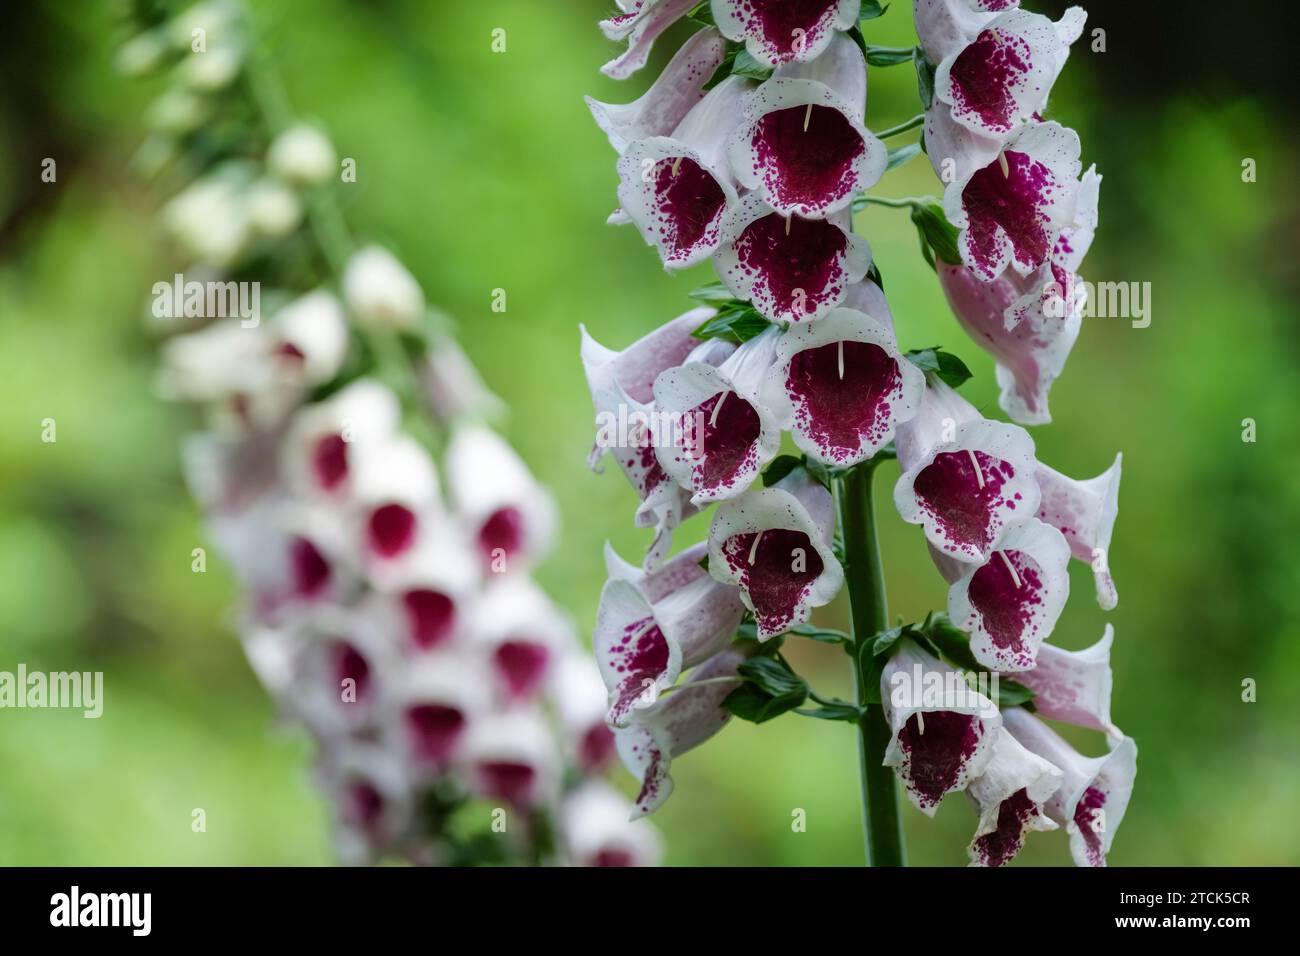 Digitalis purpurea 'Pam's Choice, foxglove, white, trumpet-shaped flowers, splotched and freckled with maroon in the throats Stock Photo